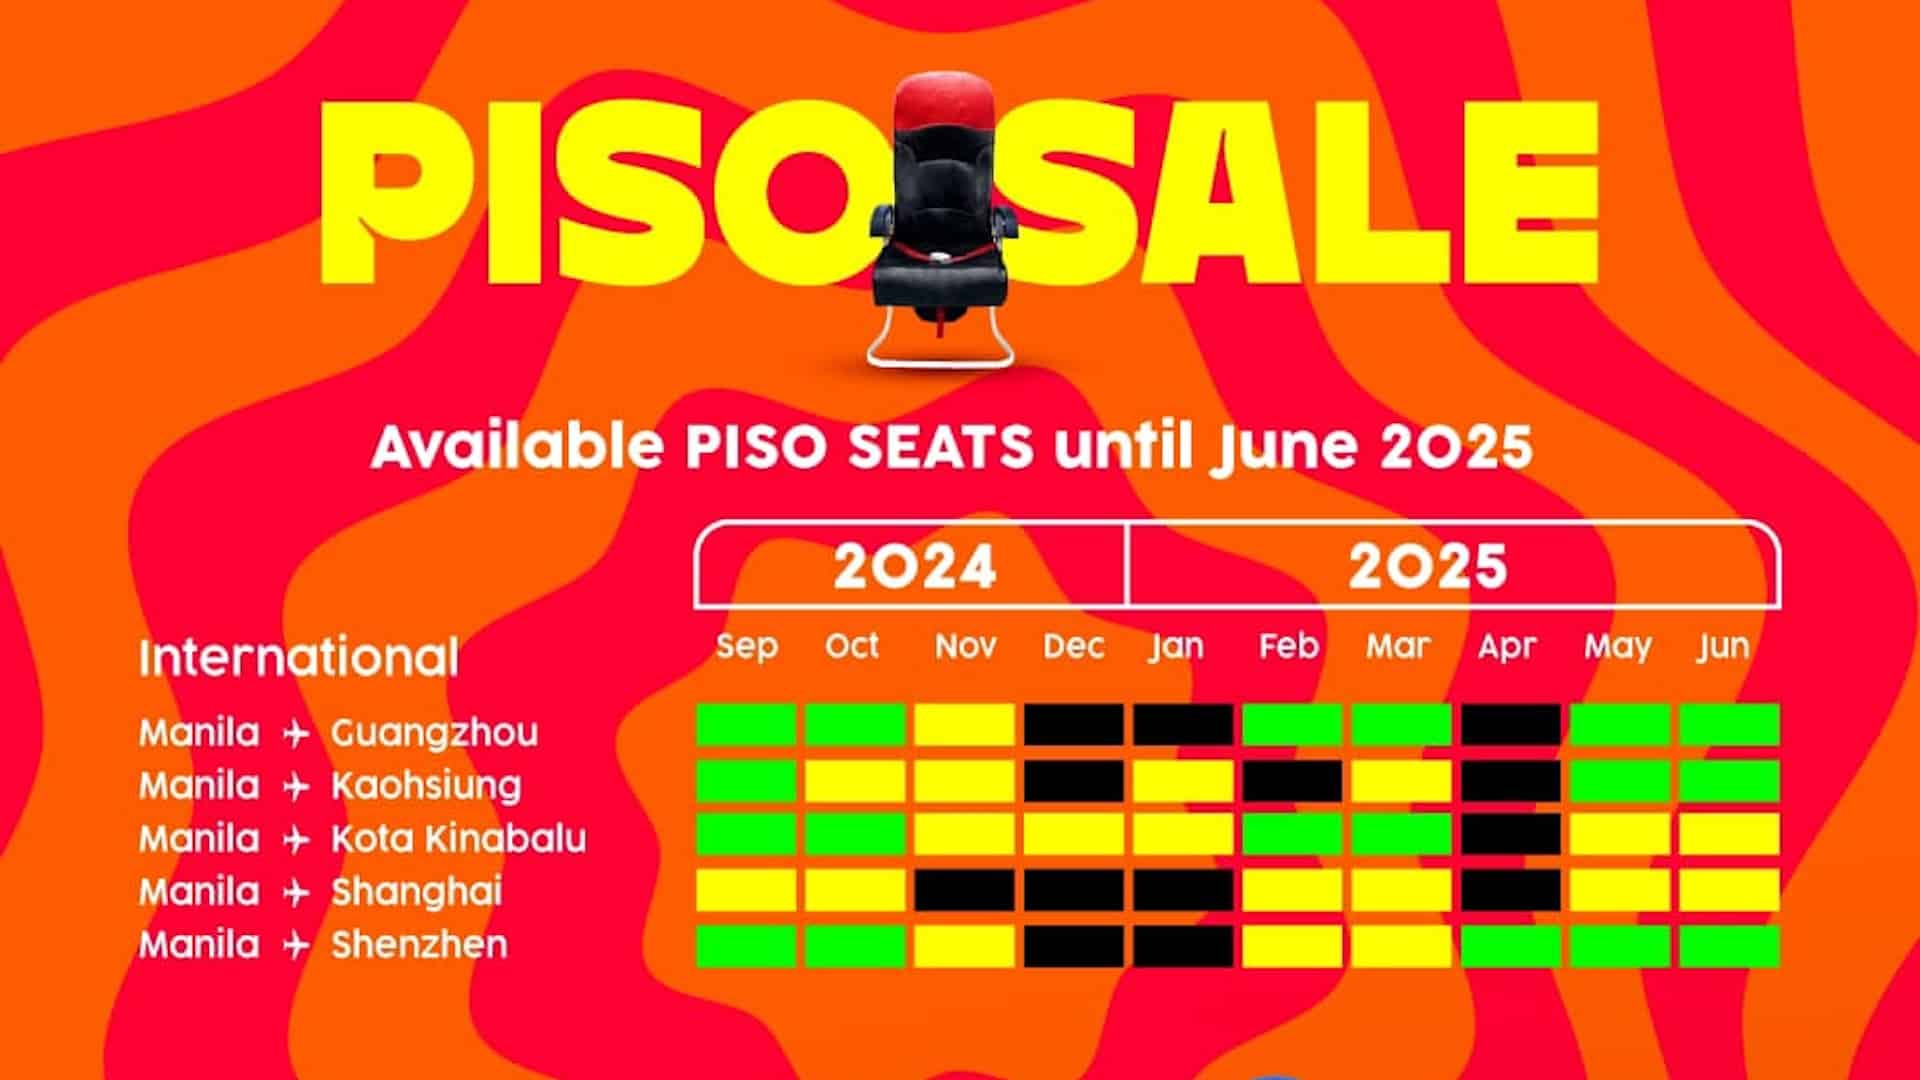 2024-2025 AIRASIA PROMOS & PISO SALE + How to Book Successfully